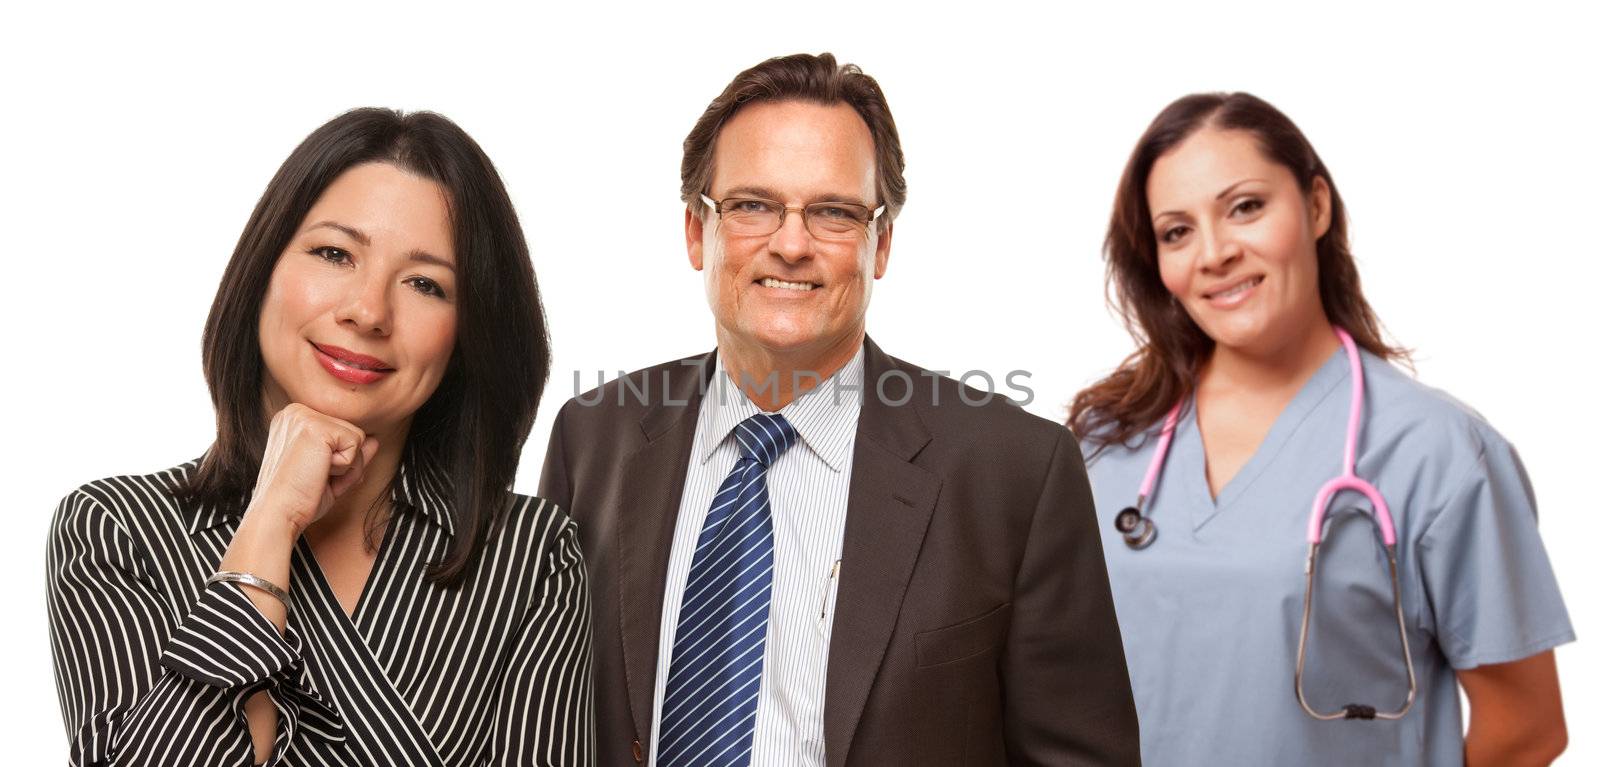 Hispanic Woman with Husband and Female Doctor or Nurse Isolated on a White Background.